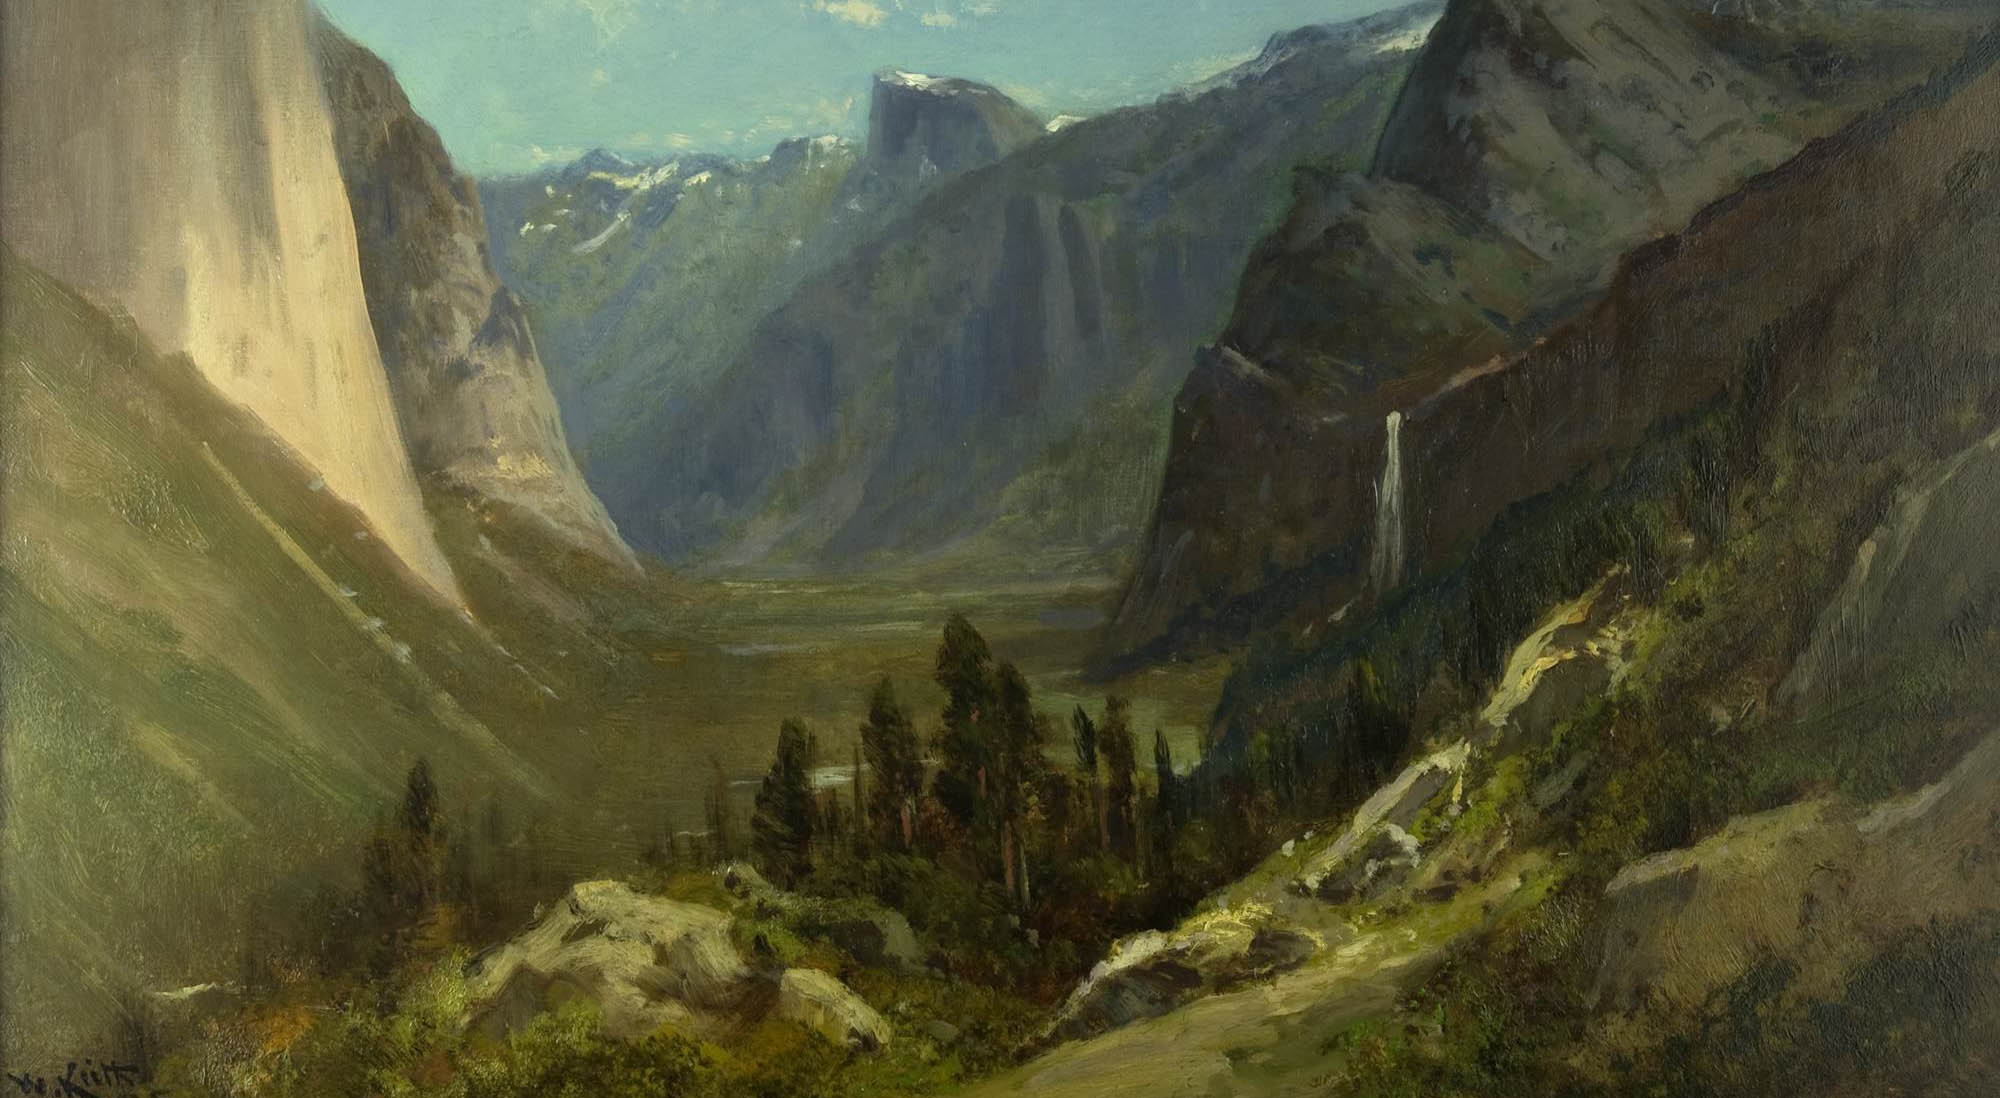 Painting of Yosemite Valley by William Keith